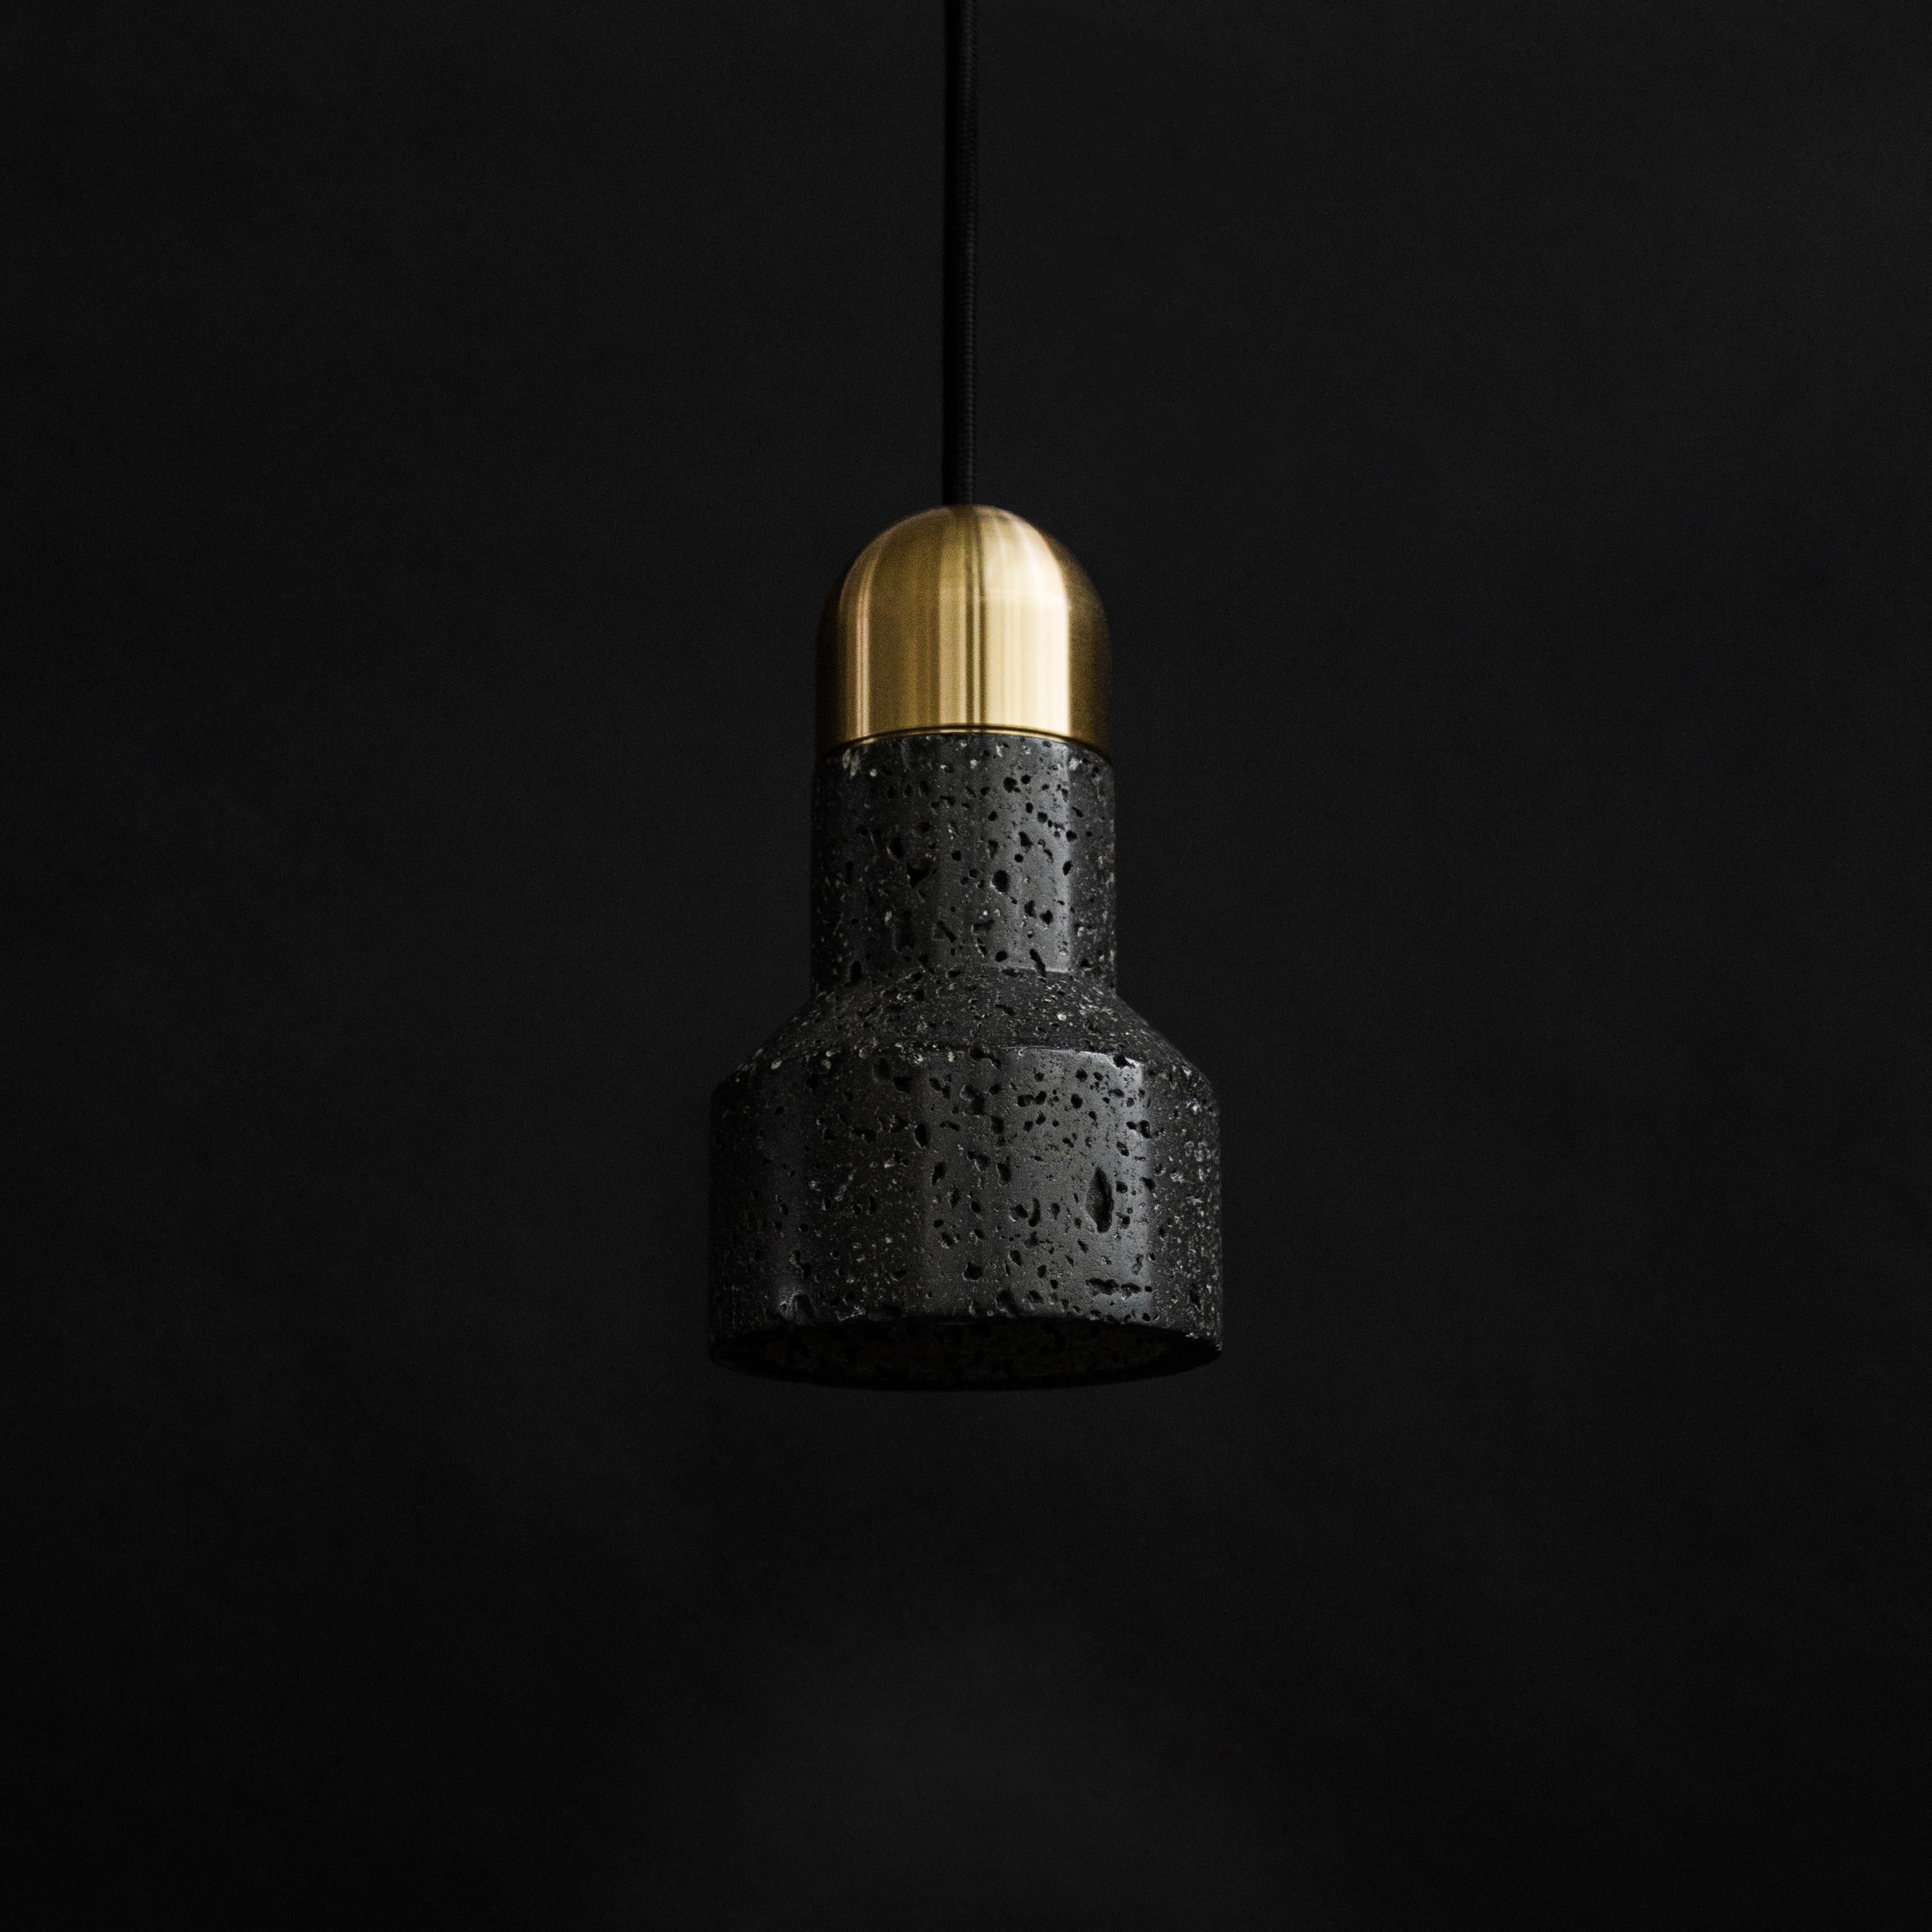 Material: Lava Stone
Fittings: Brass
Color: Black
Dimension: 96 x 96 x 160 mm
Weight: 1.38 kg
Cord: 3000 - 3010 mm
Light Source: LED E27
CCT: 3000 - 3500 K
CRI: 80 - 90 Ra
Flux: 230 lm
Supply: 86 - 240 V
Wattage: 3 W . Max 40 W

About